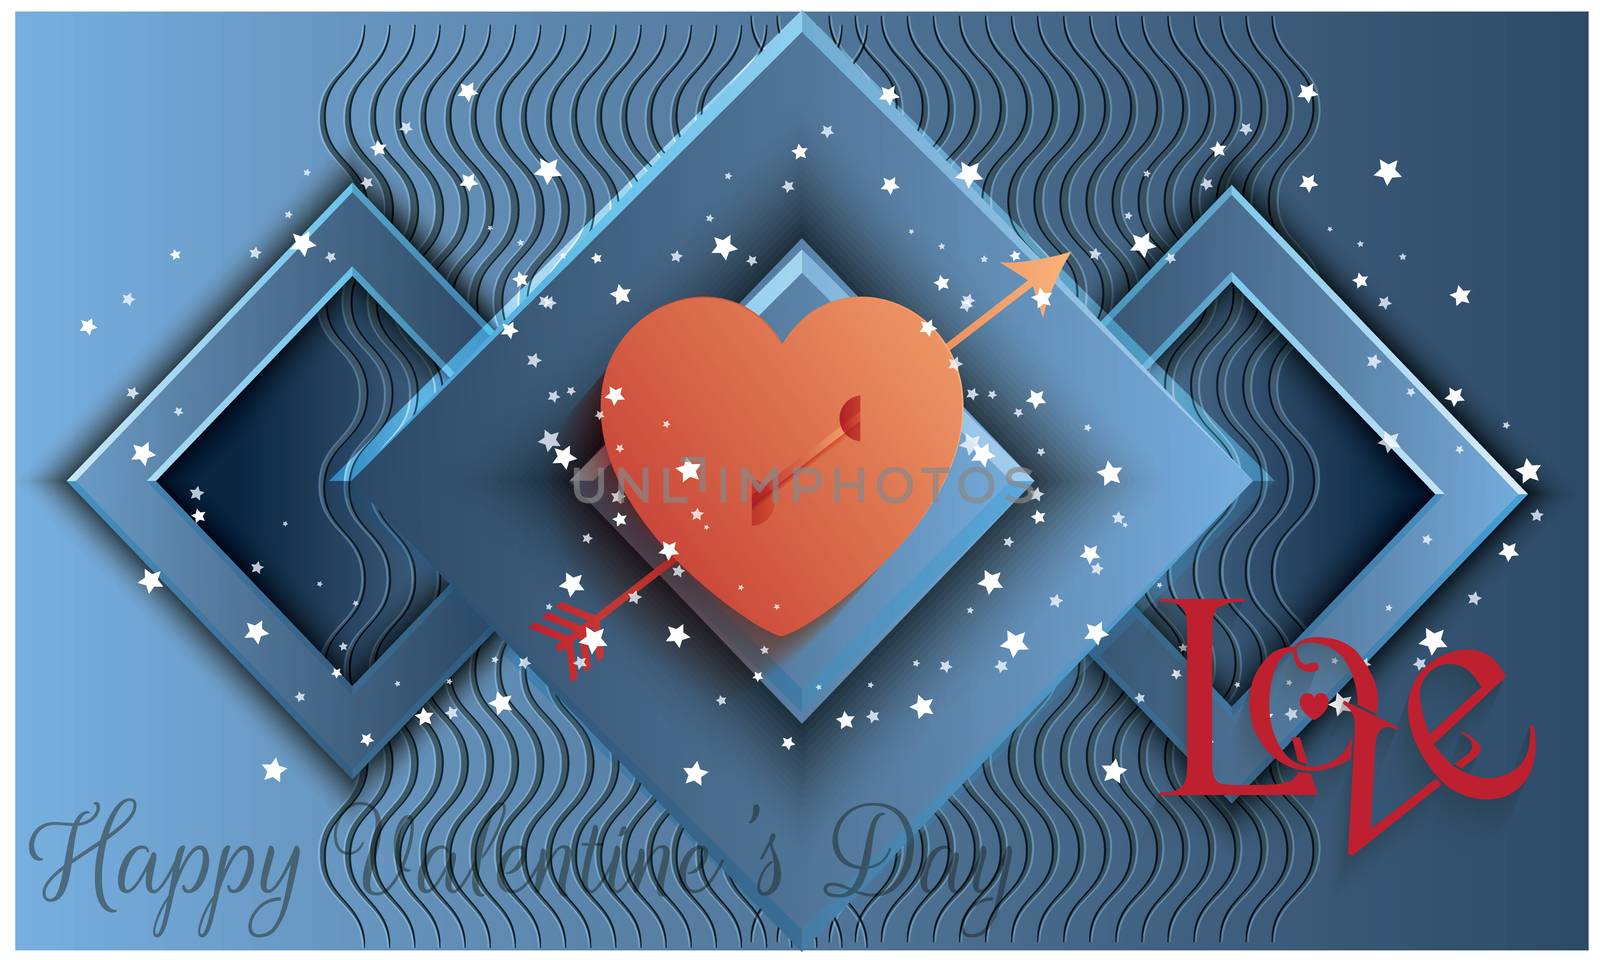 a love message on heart with background texture